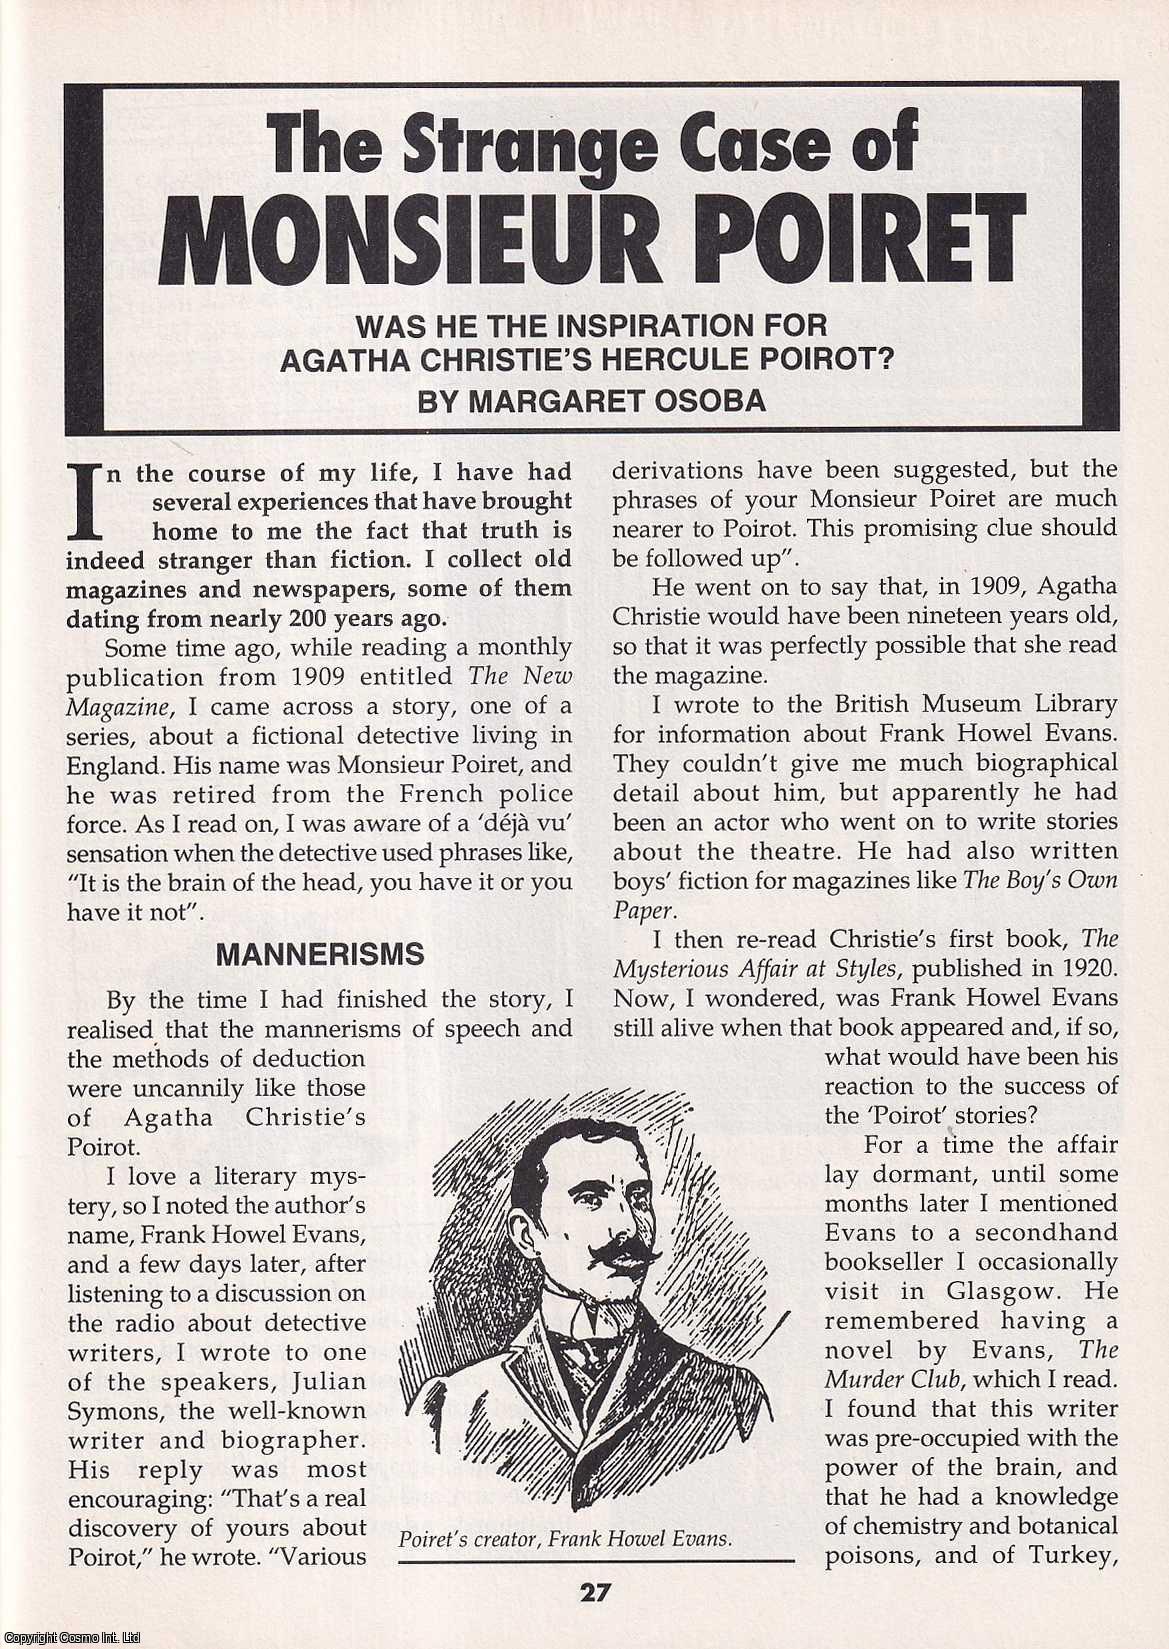 Margaret Osoba - The Strange Case of Monsieur Poiret : Was he The Inspiration For Agatha Christie's Hercule Poirot. This is an original article separated from an issue of The Book & Magazine Collector publication.